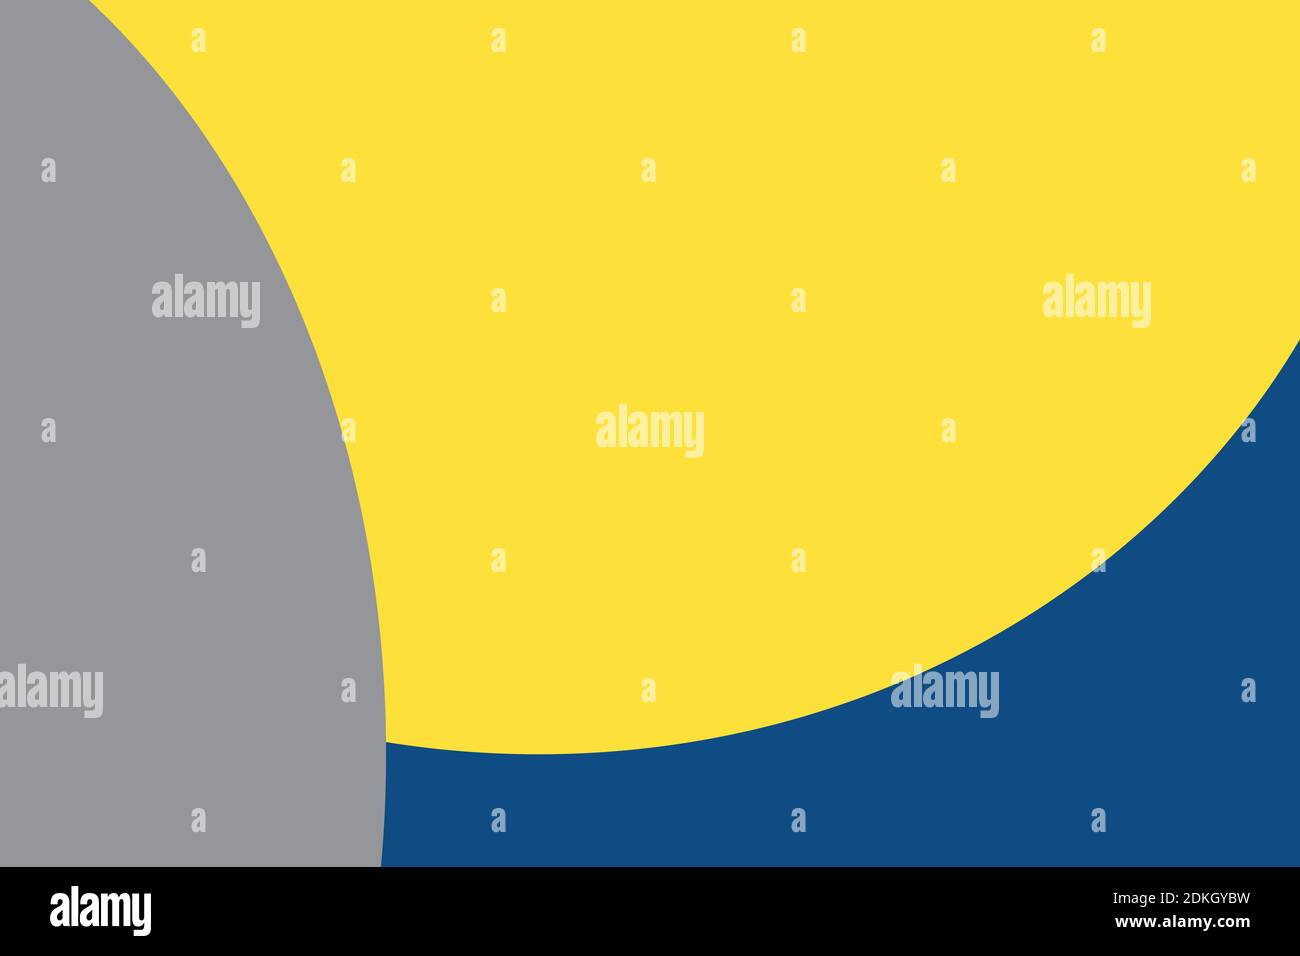 Three color background of trendy colors 2021 and 2020. Yellow, grey and classic blue. Circles forms. Copy space. Stock Photo